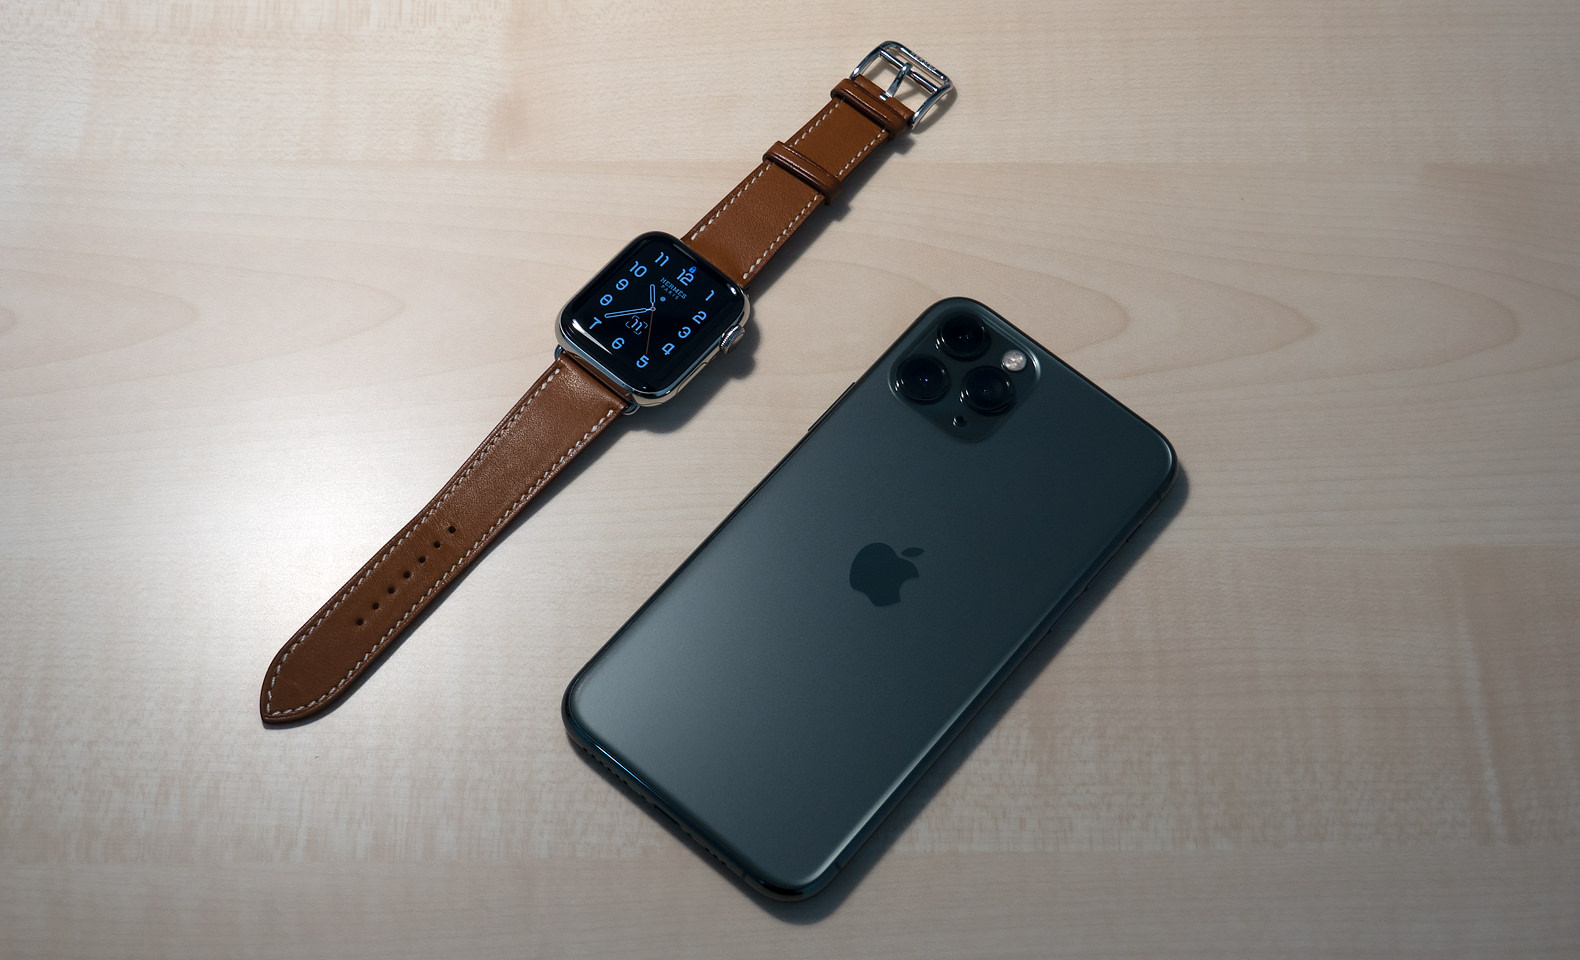 ApplewatchとiPhone11